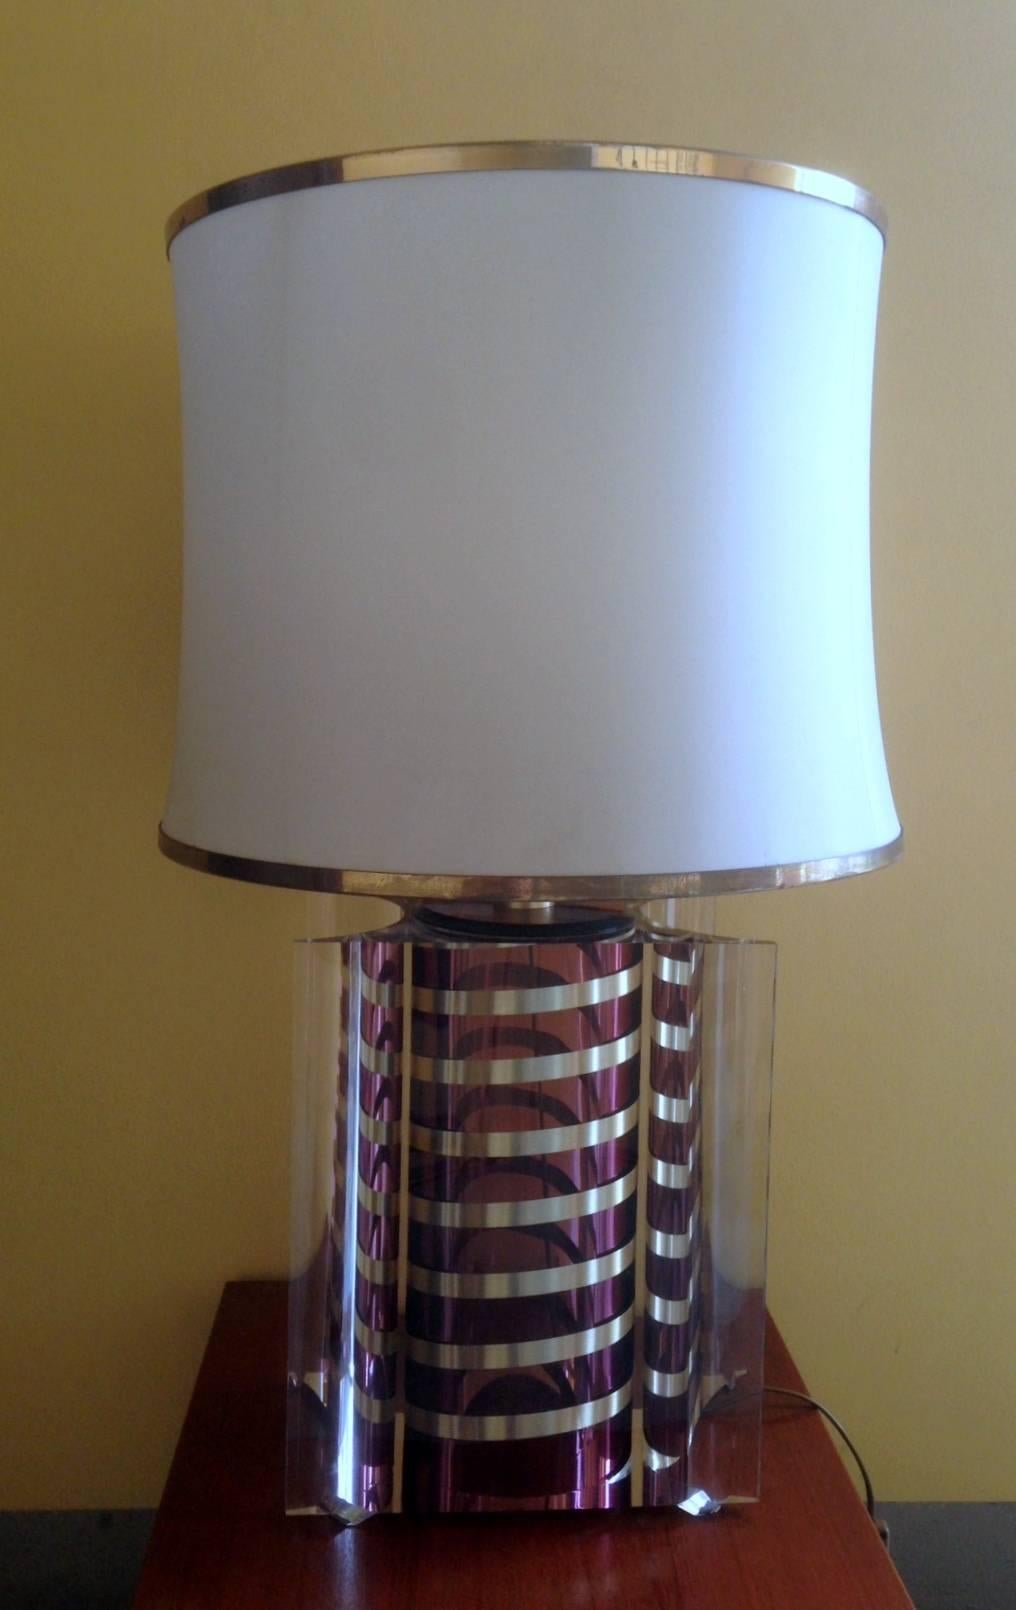 Amazing table lamp in perspex with stripes design. 
This lamp base size is 50 cm H. with the shade is 80 cm. and 44 cm diameter.